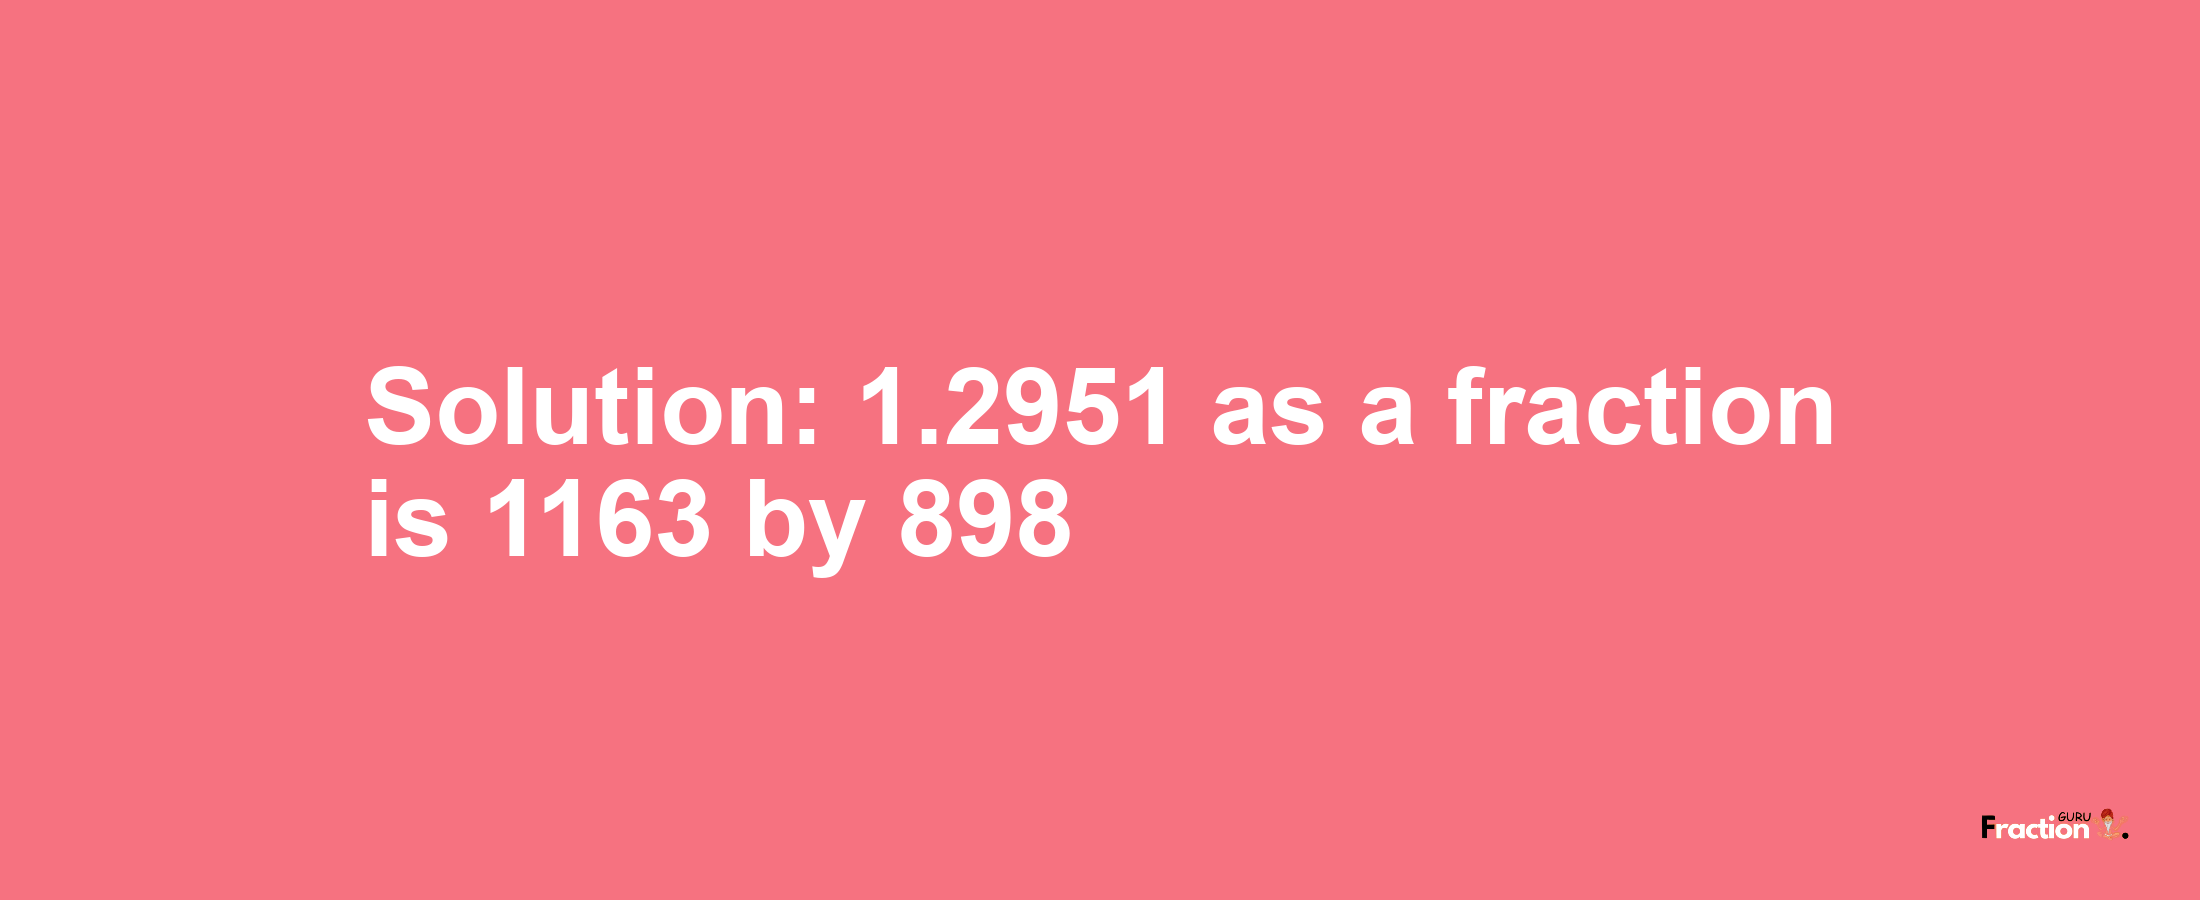 Solution:1.2951 as a fraction is 1163/898